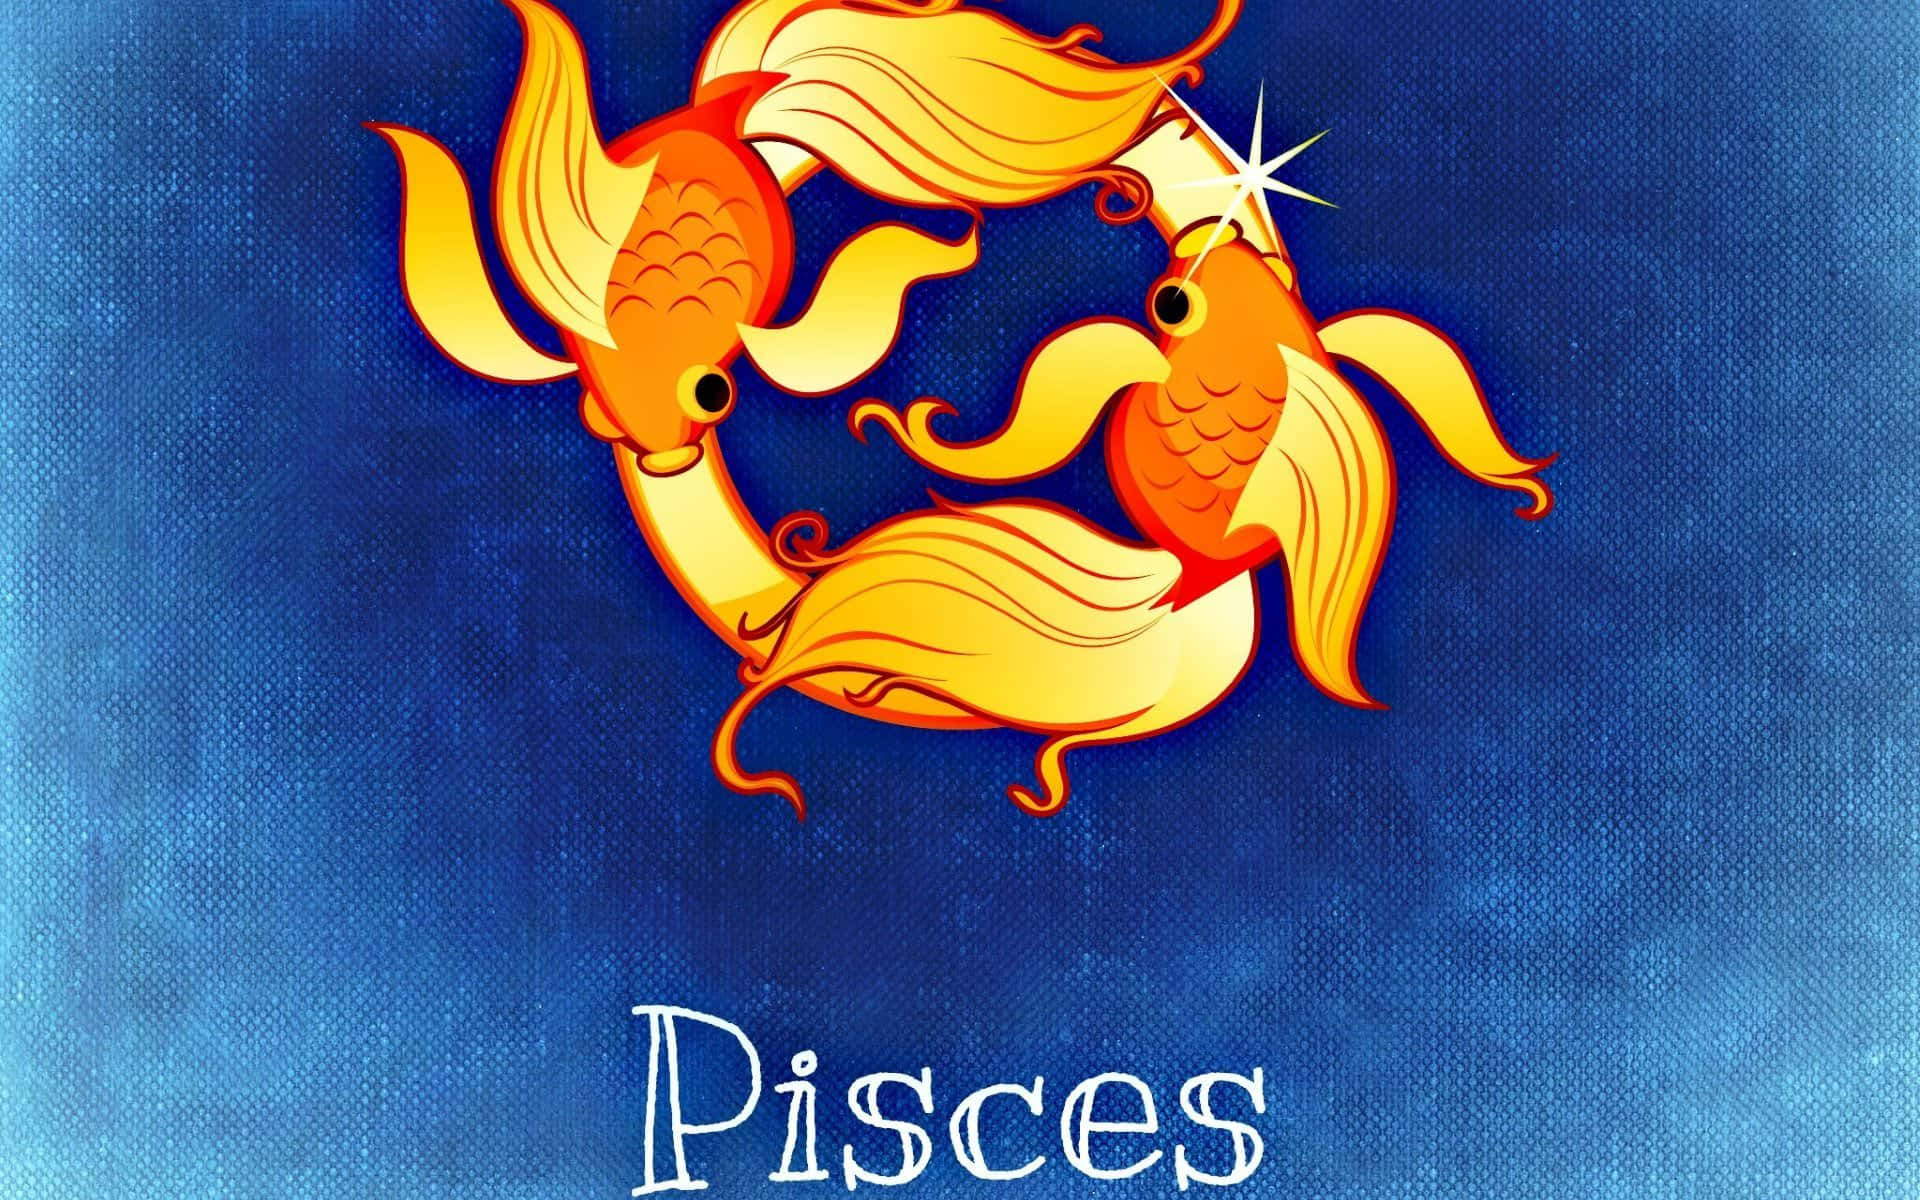 "Celebrate Your Uniqueness with Pisces" Wallpaper